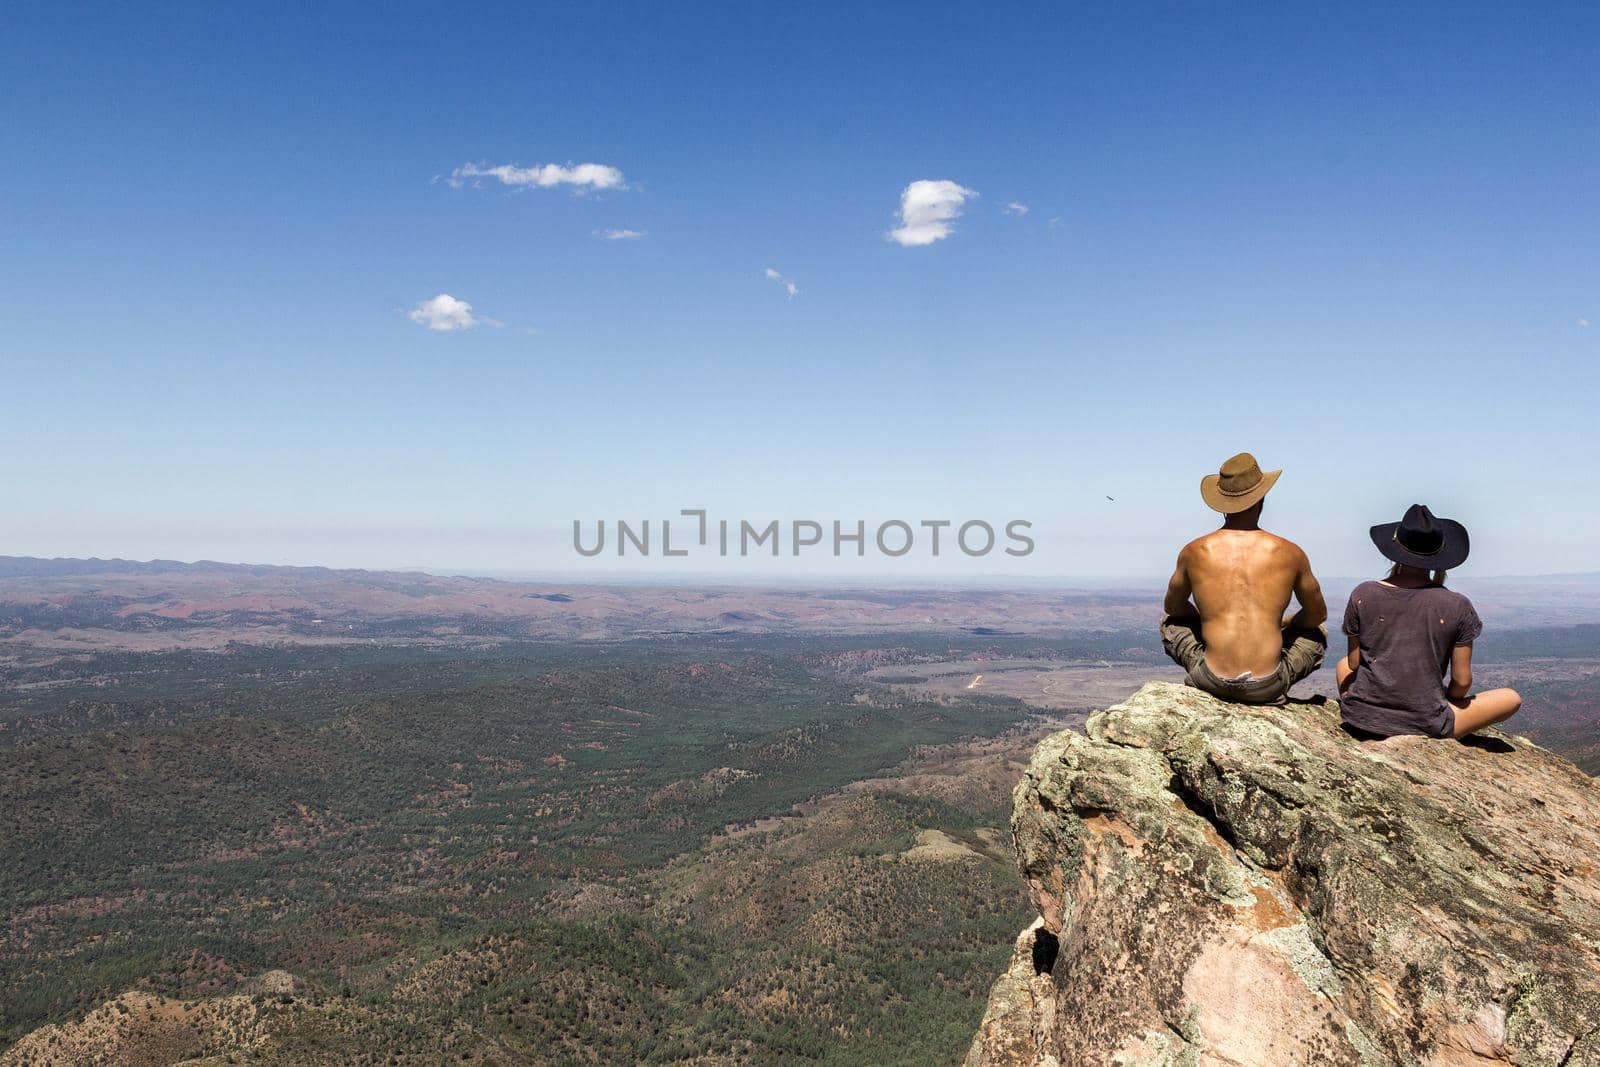 jung women and men sitting on St Mary's Peak from the Flinders Ranges National Park by bettercallcurry